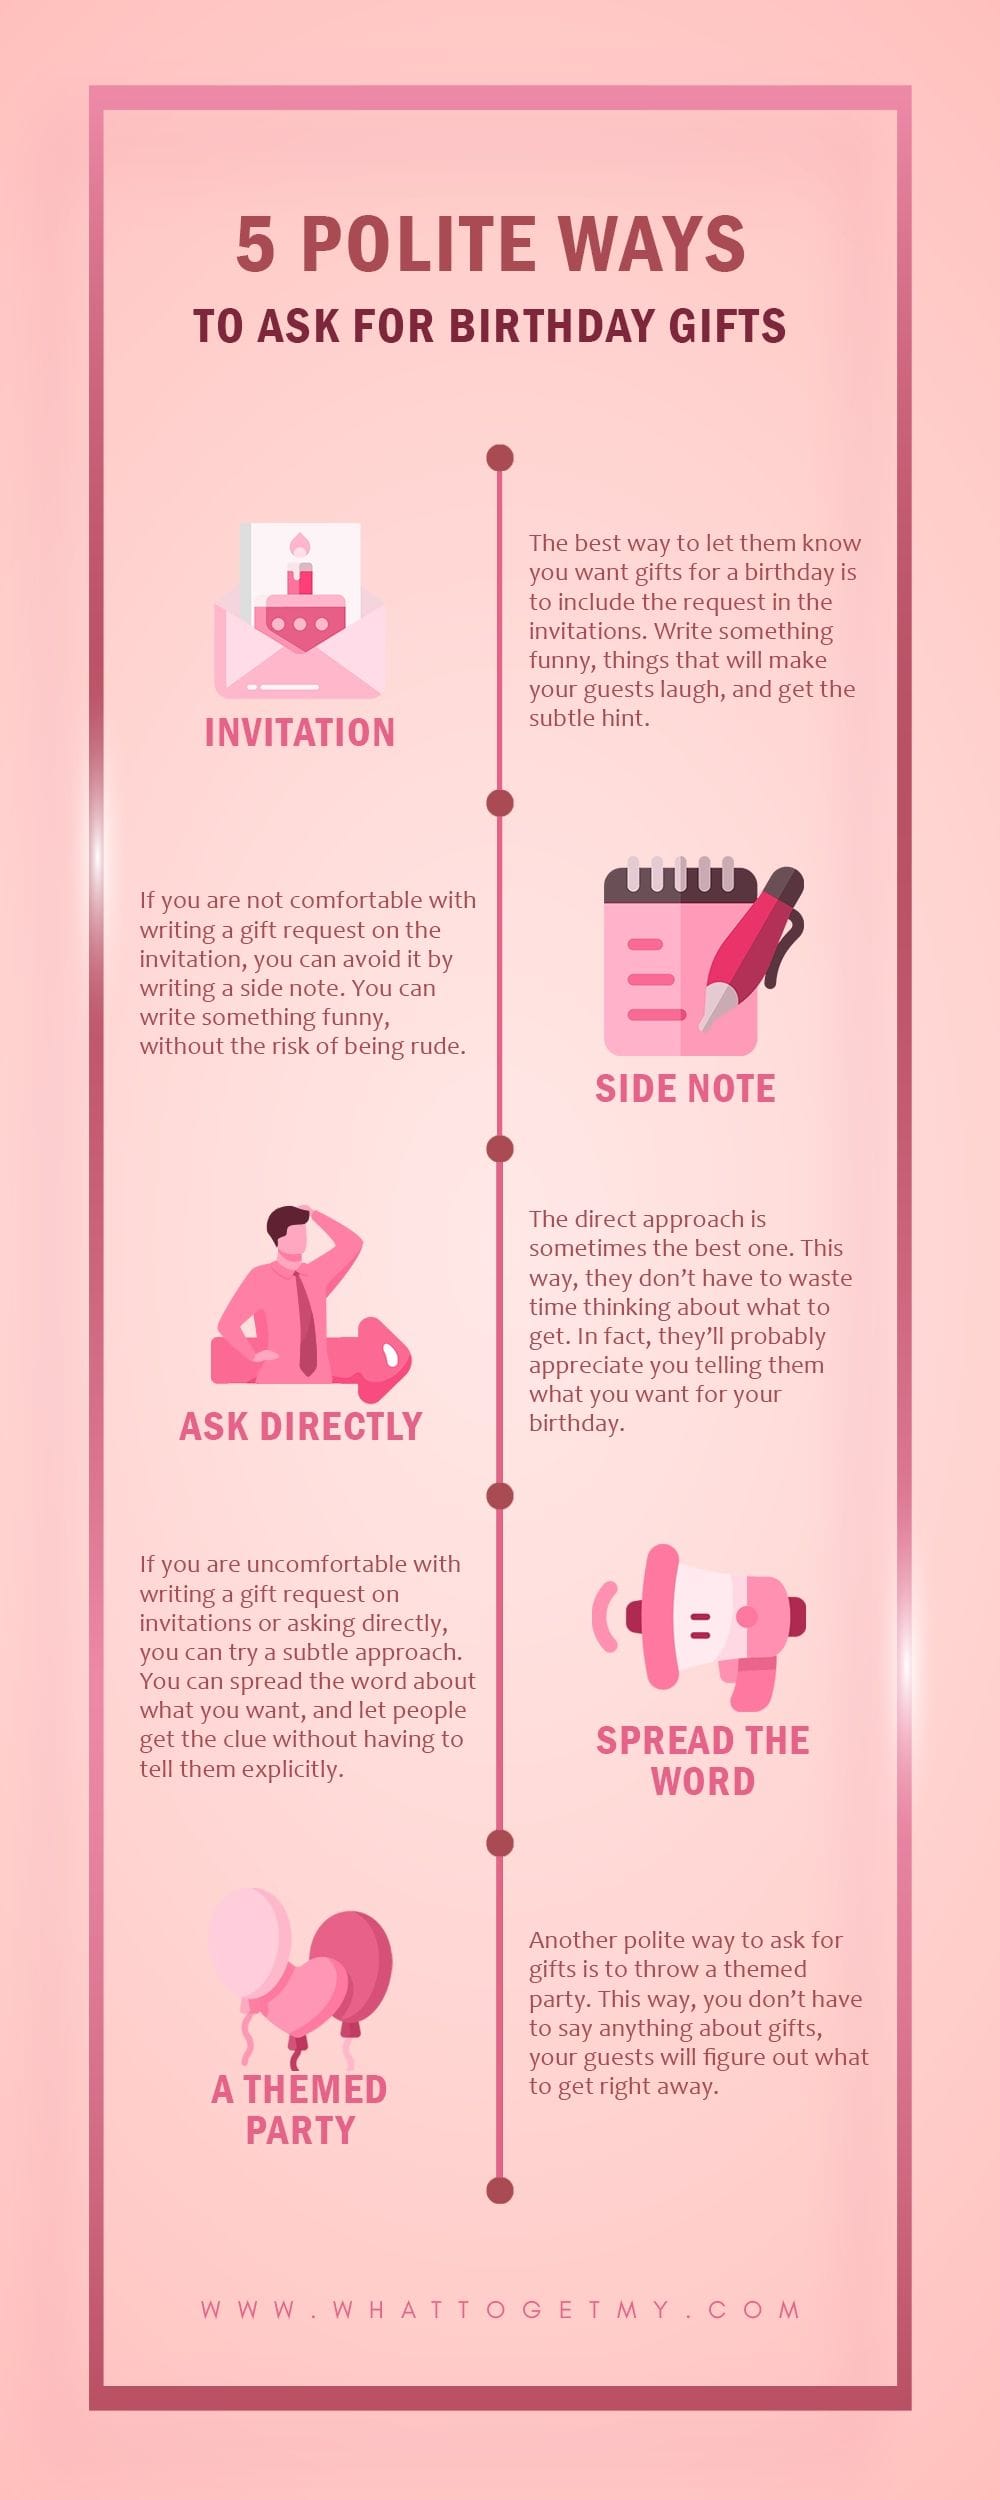 Infographic 5 Polite Ways to Ask For Birthday Gifts